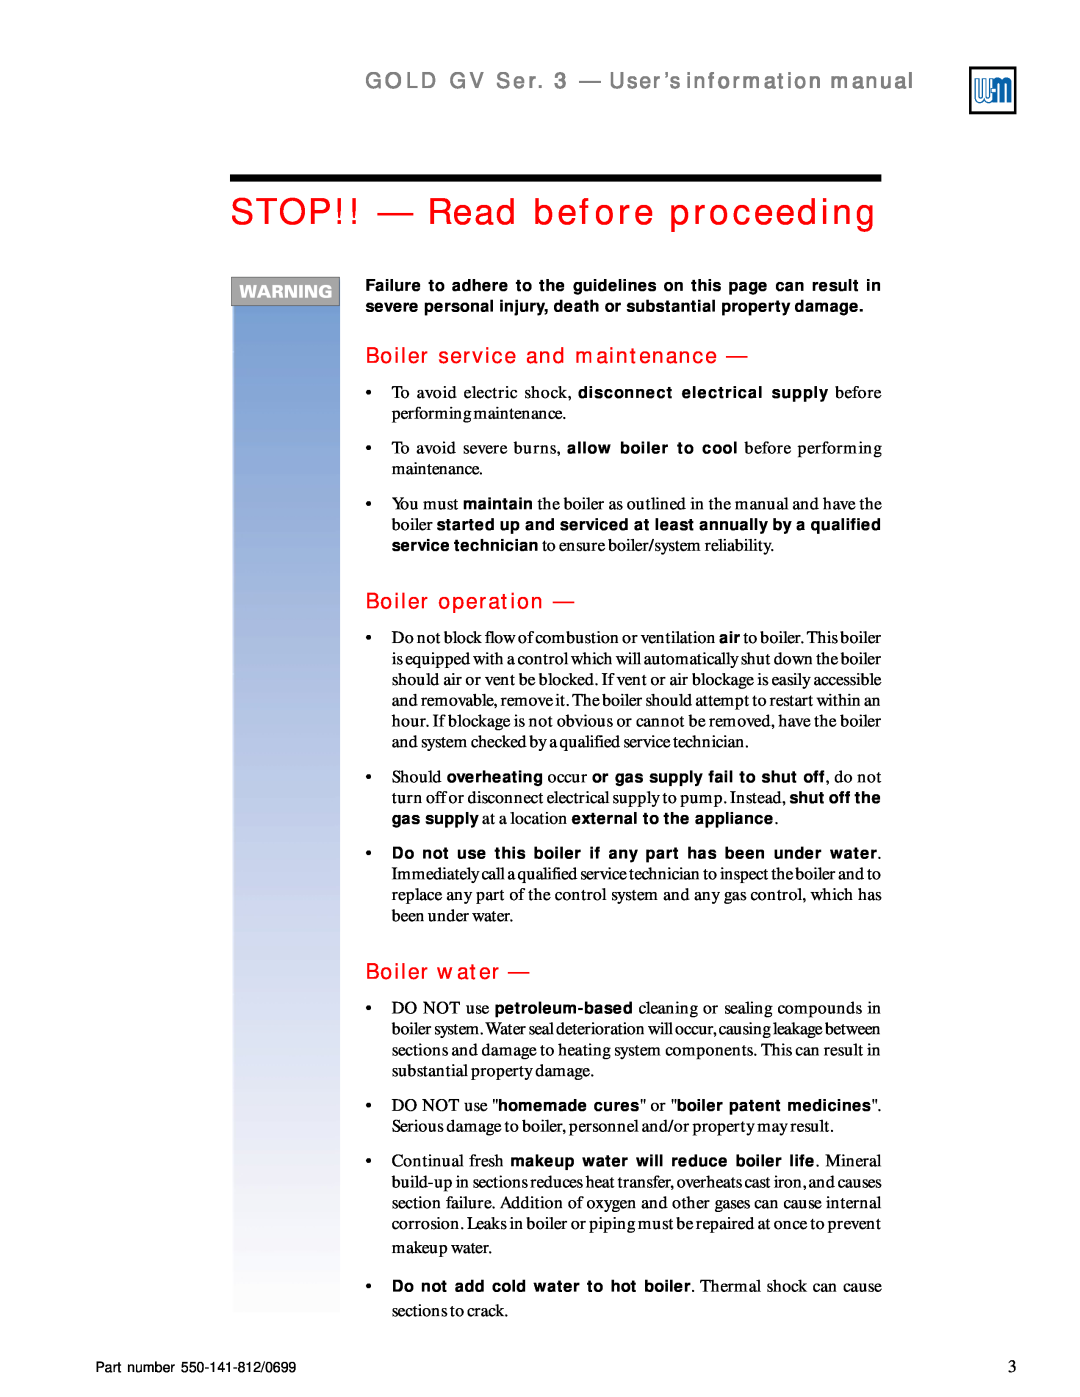 Weil-McLain 3 Series STOP!! — Read before proceeding, GOLD GV Ser. 3 — User’s information manual, Boiler operation 